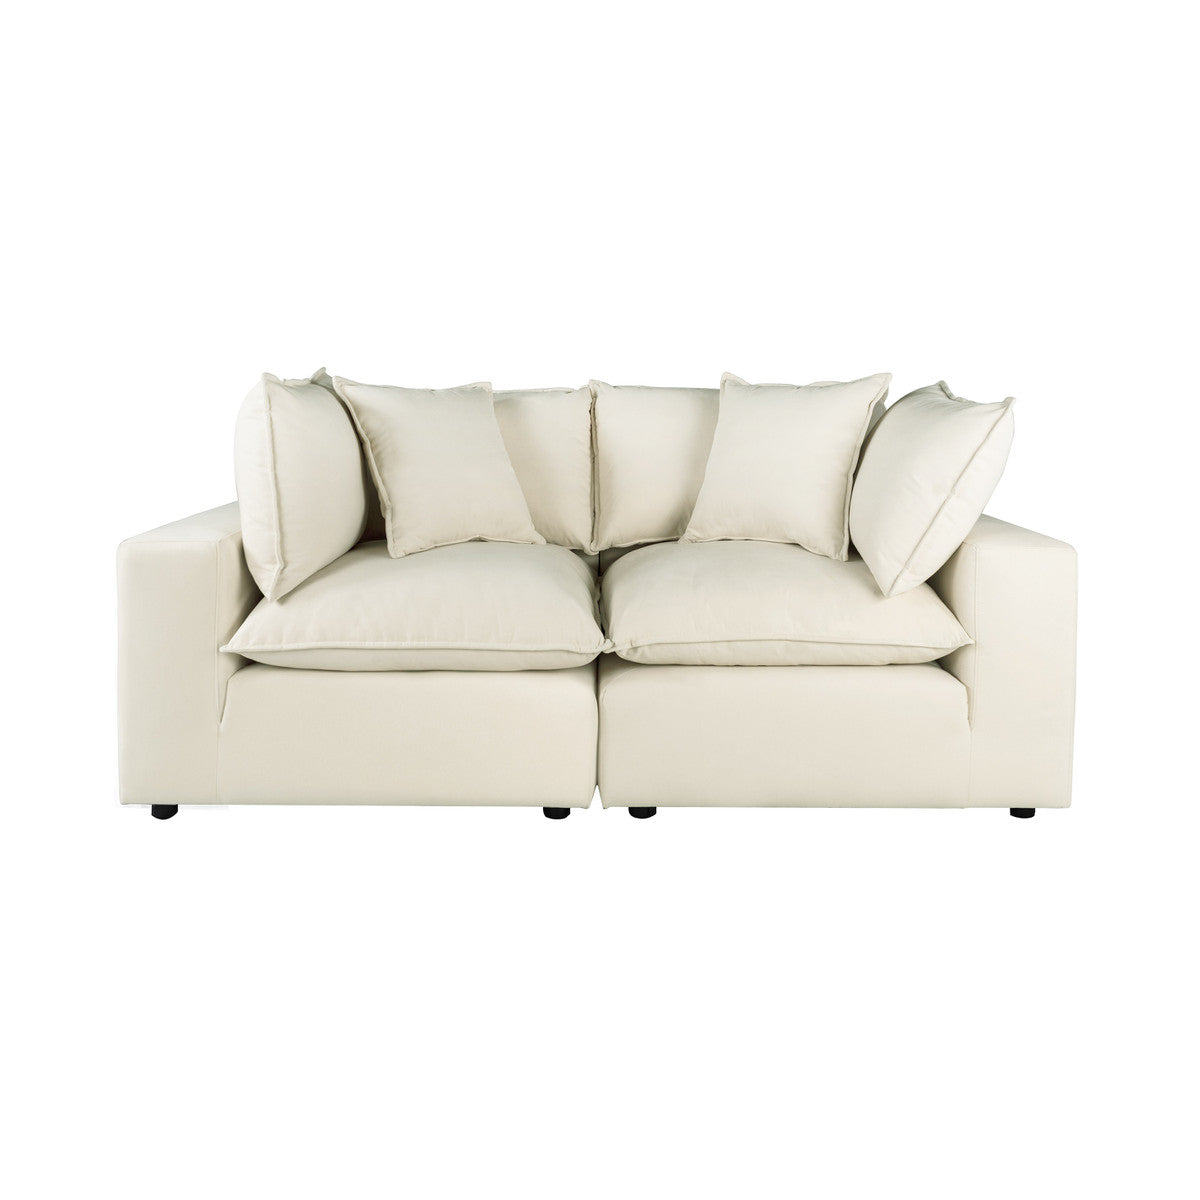 Carlie Natural Modular Loveseat - Luxury Living Collection